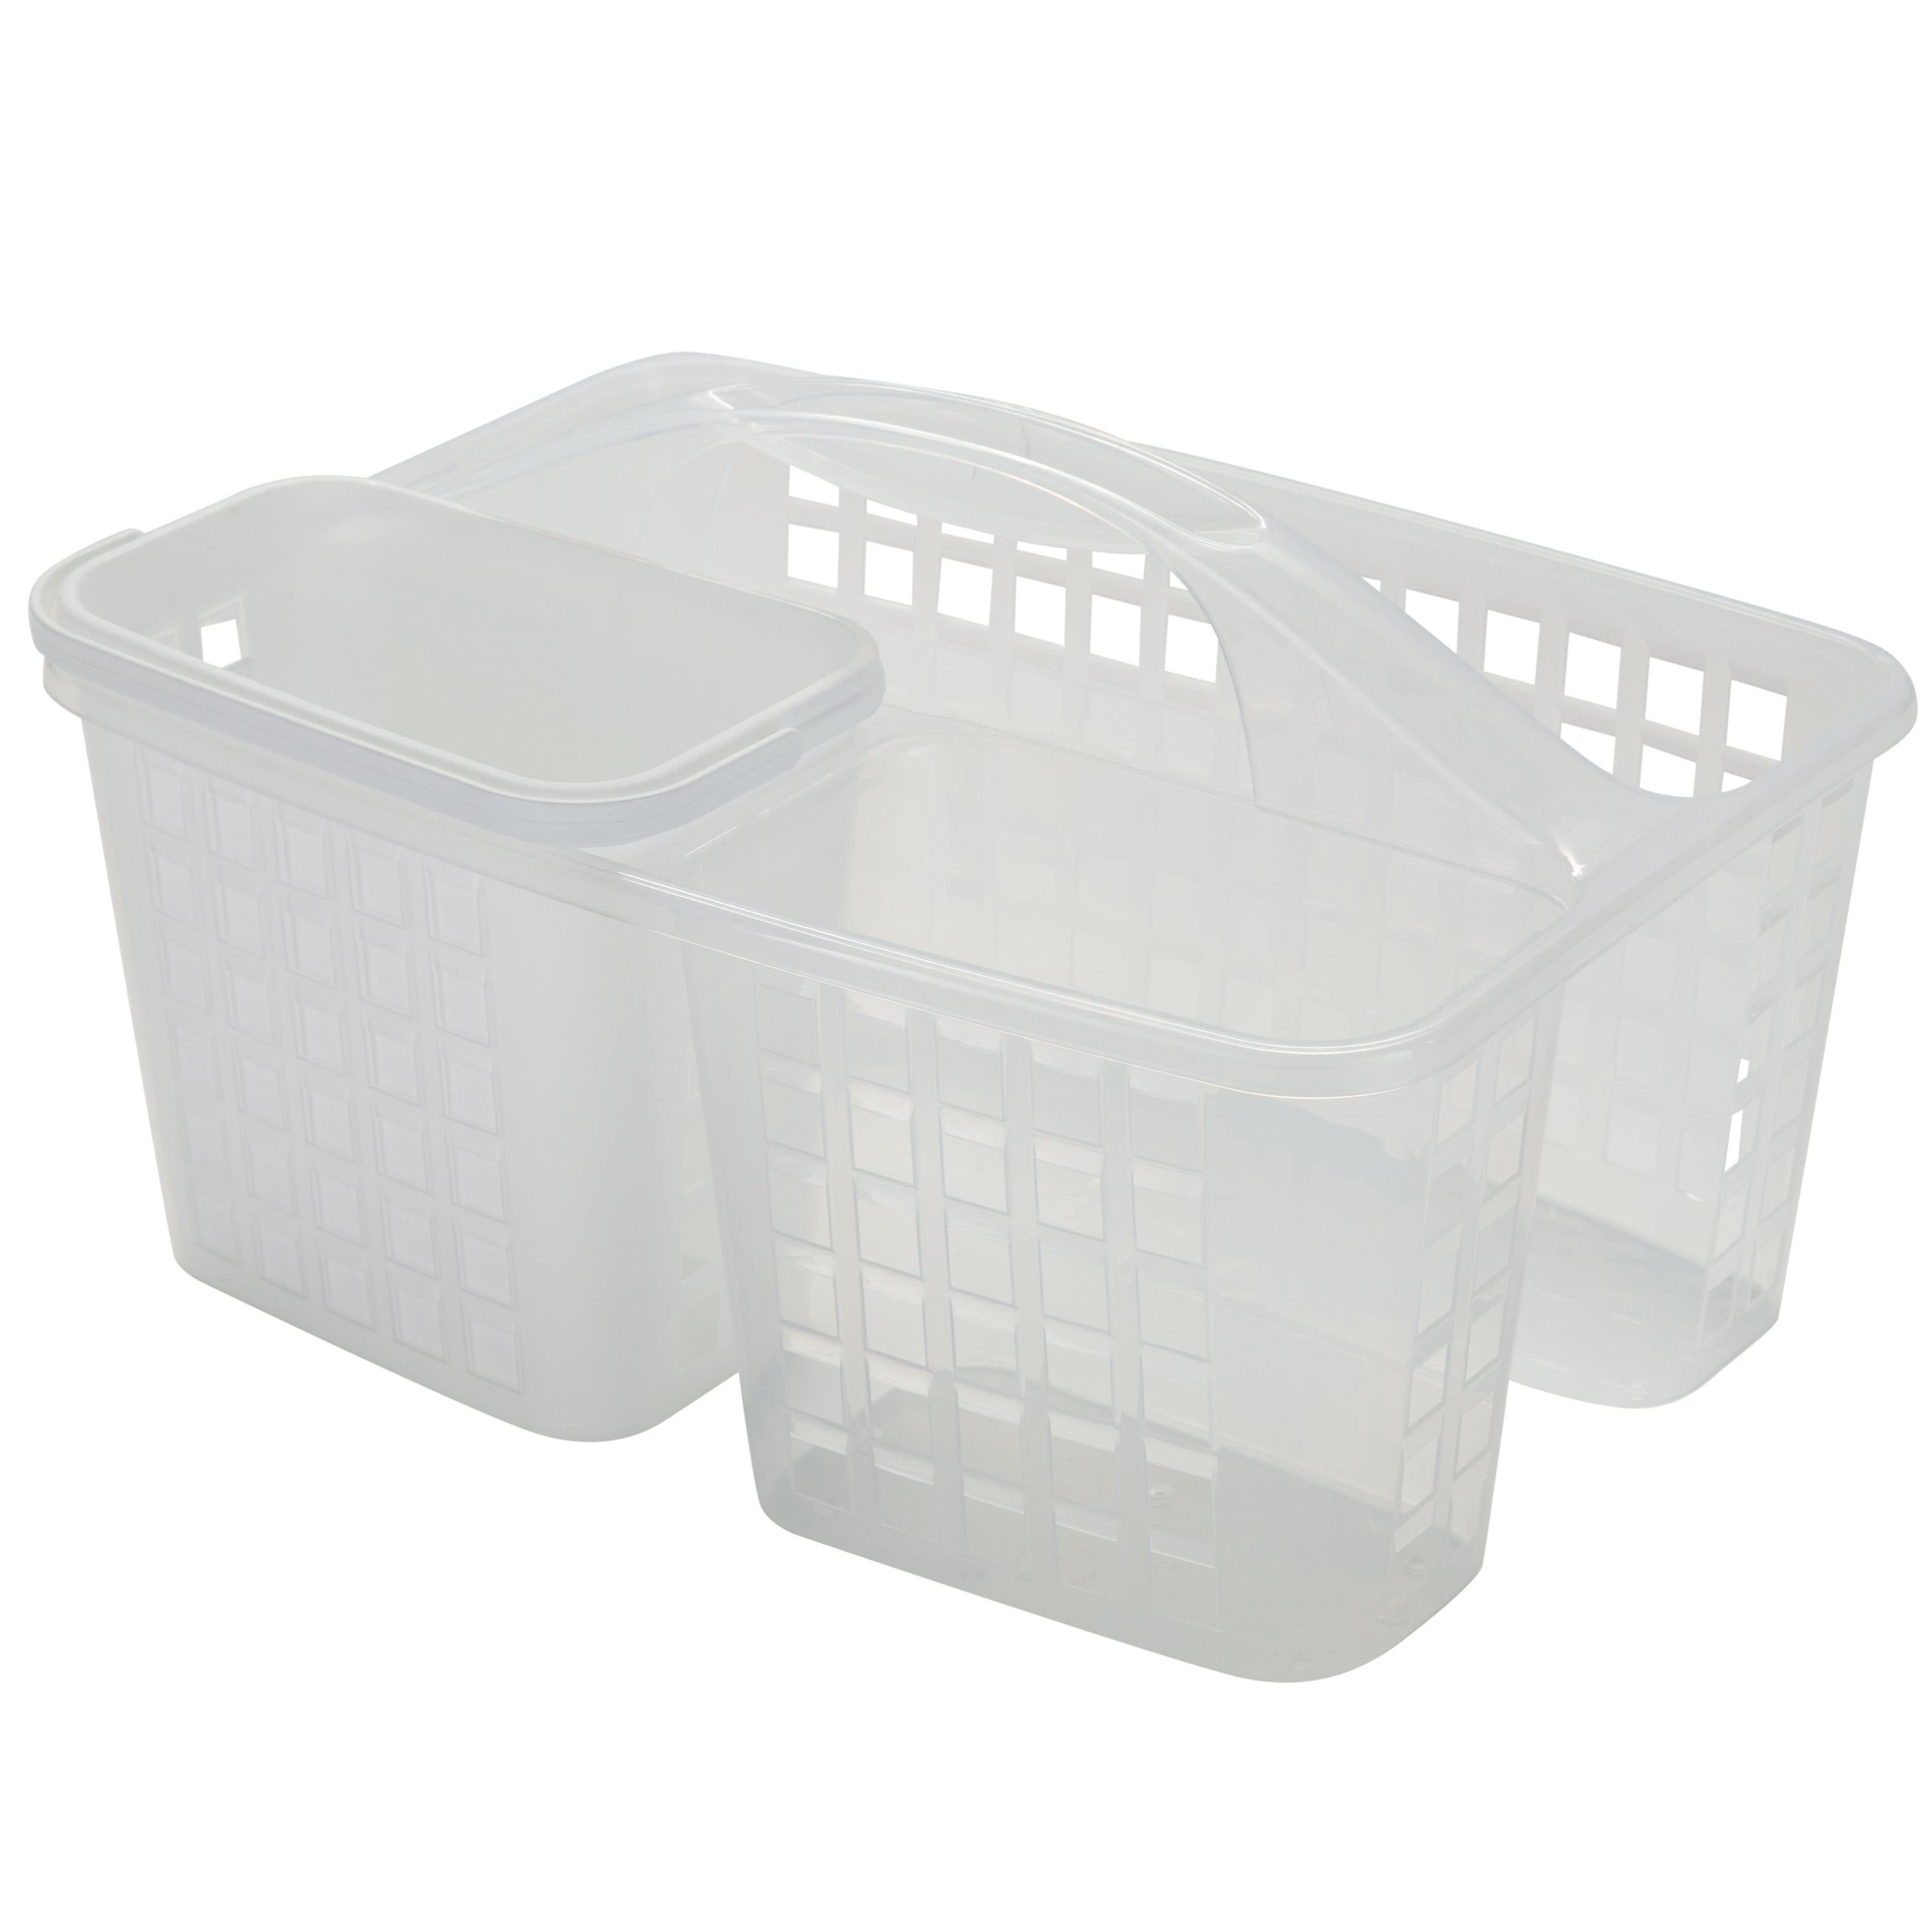 2 in 1 Plastic Shower Caddy Gray - Room Essentials